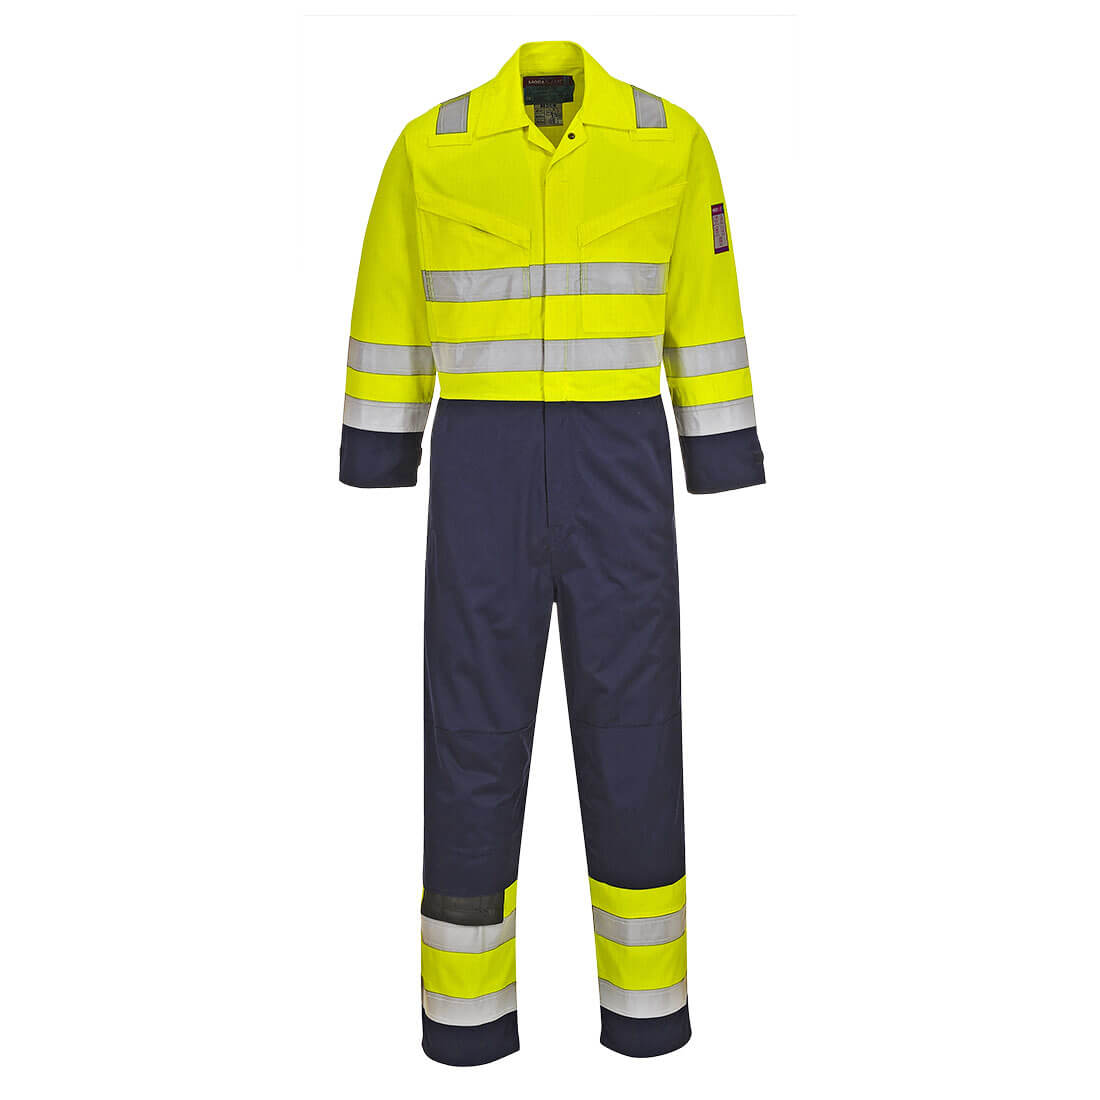 Image of Modaflame Flame Resistant Hi Vis Overall Yellow / Navy 5XL 32"